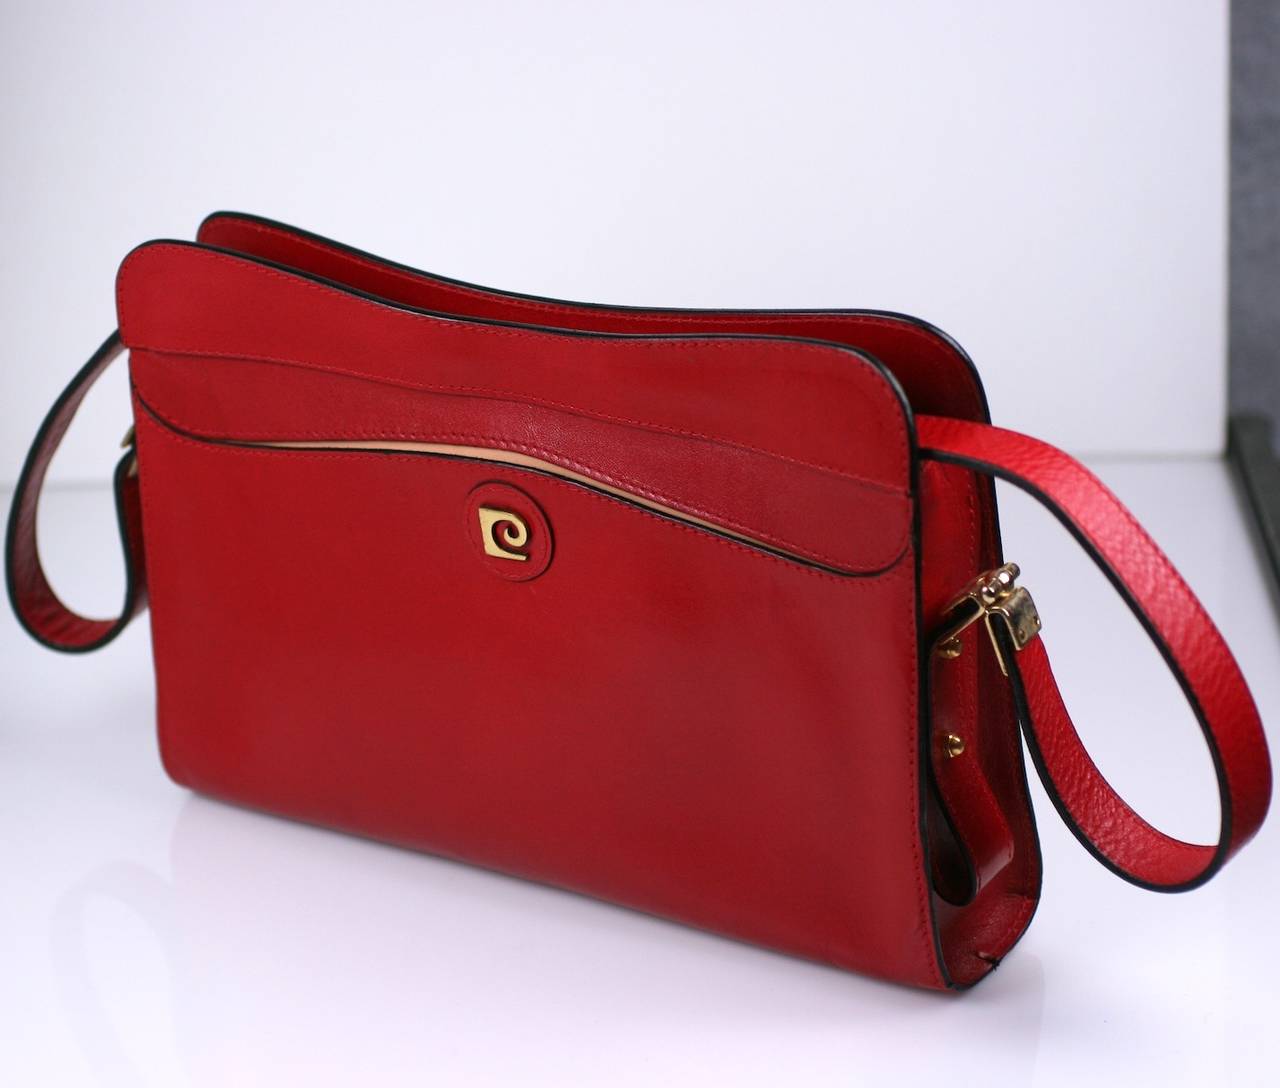 Pierre Cardin red leather shoulder bag with gilded PC logo. One exterior pocket with zippered central compartment. Interesting metal fittings on shoulder strap (non adjustable). Excellent condition. 1980's France. 
10.5